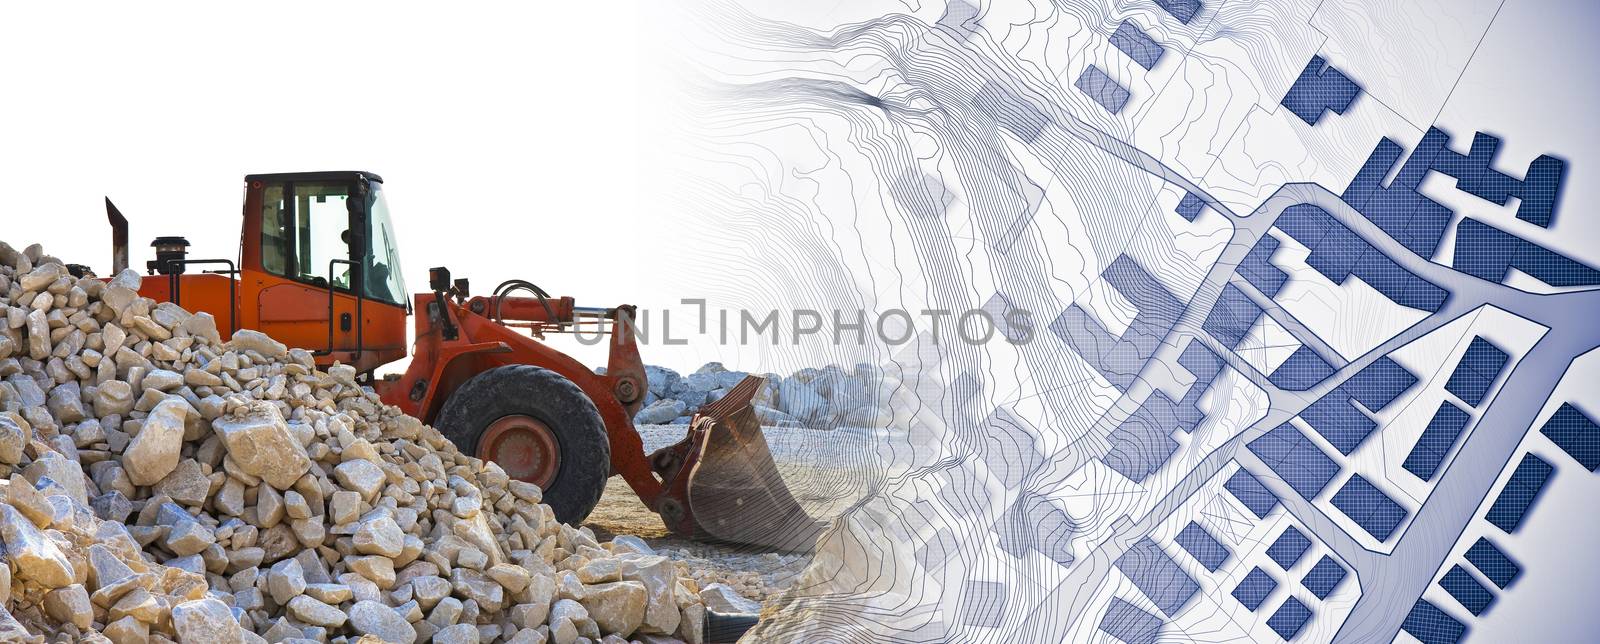 Earth mover with a dam of white stones on a construction site - concept image with a city map.